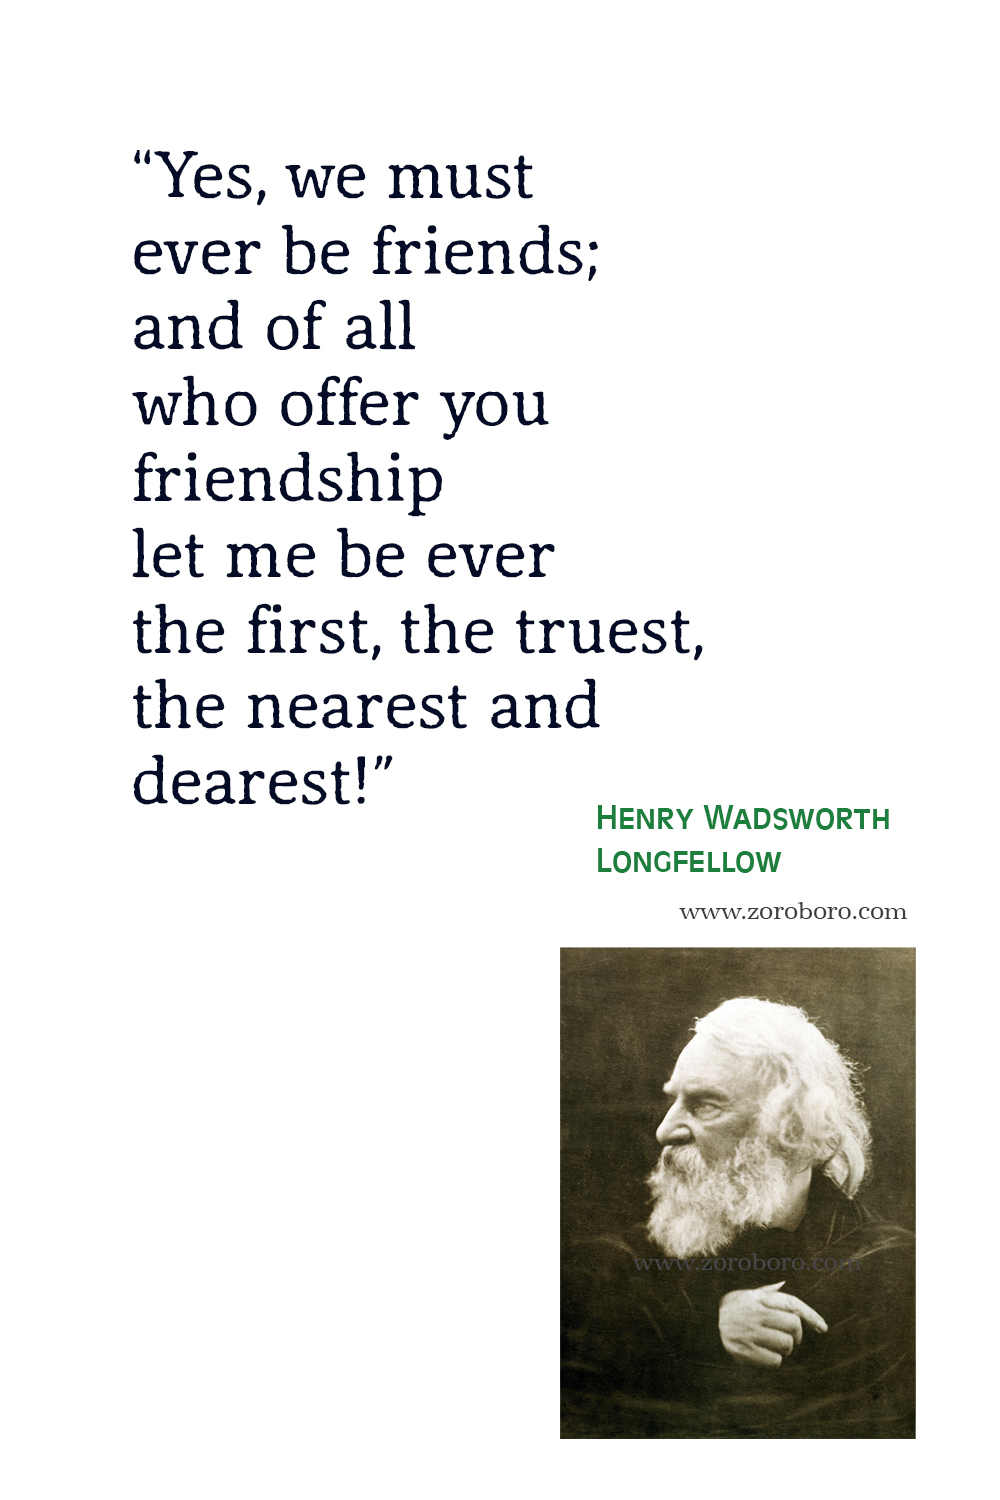 Henry Wadsworth Longfellow Quotes, Henry Wadsworth Longfellow Poems, Books, Henry Wadsworth Longfellow Poetry, Motivational Quotes.